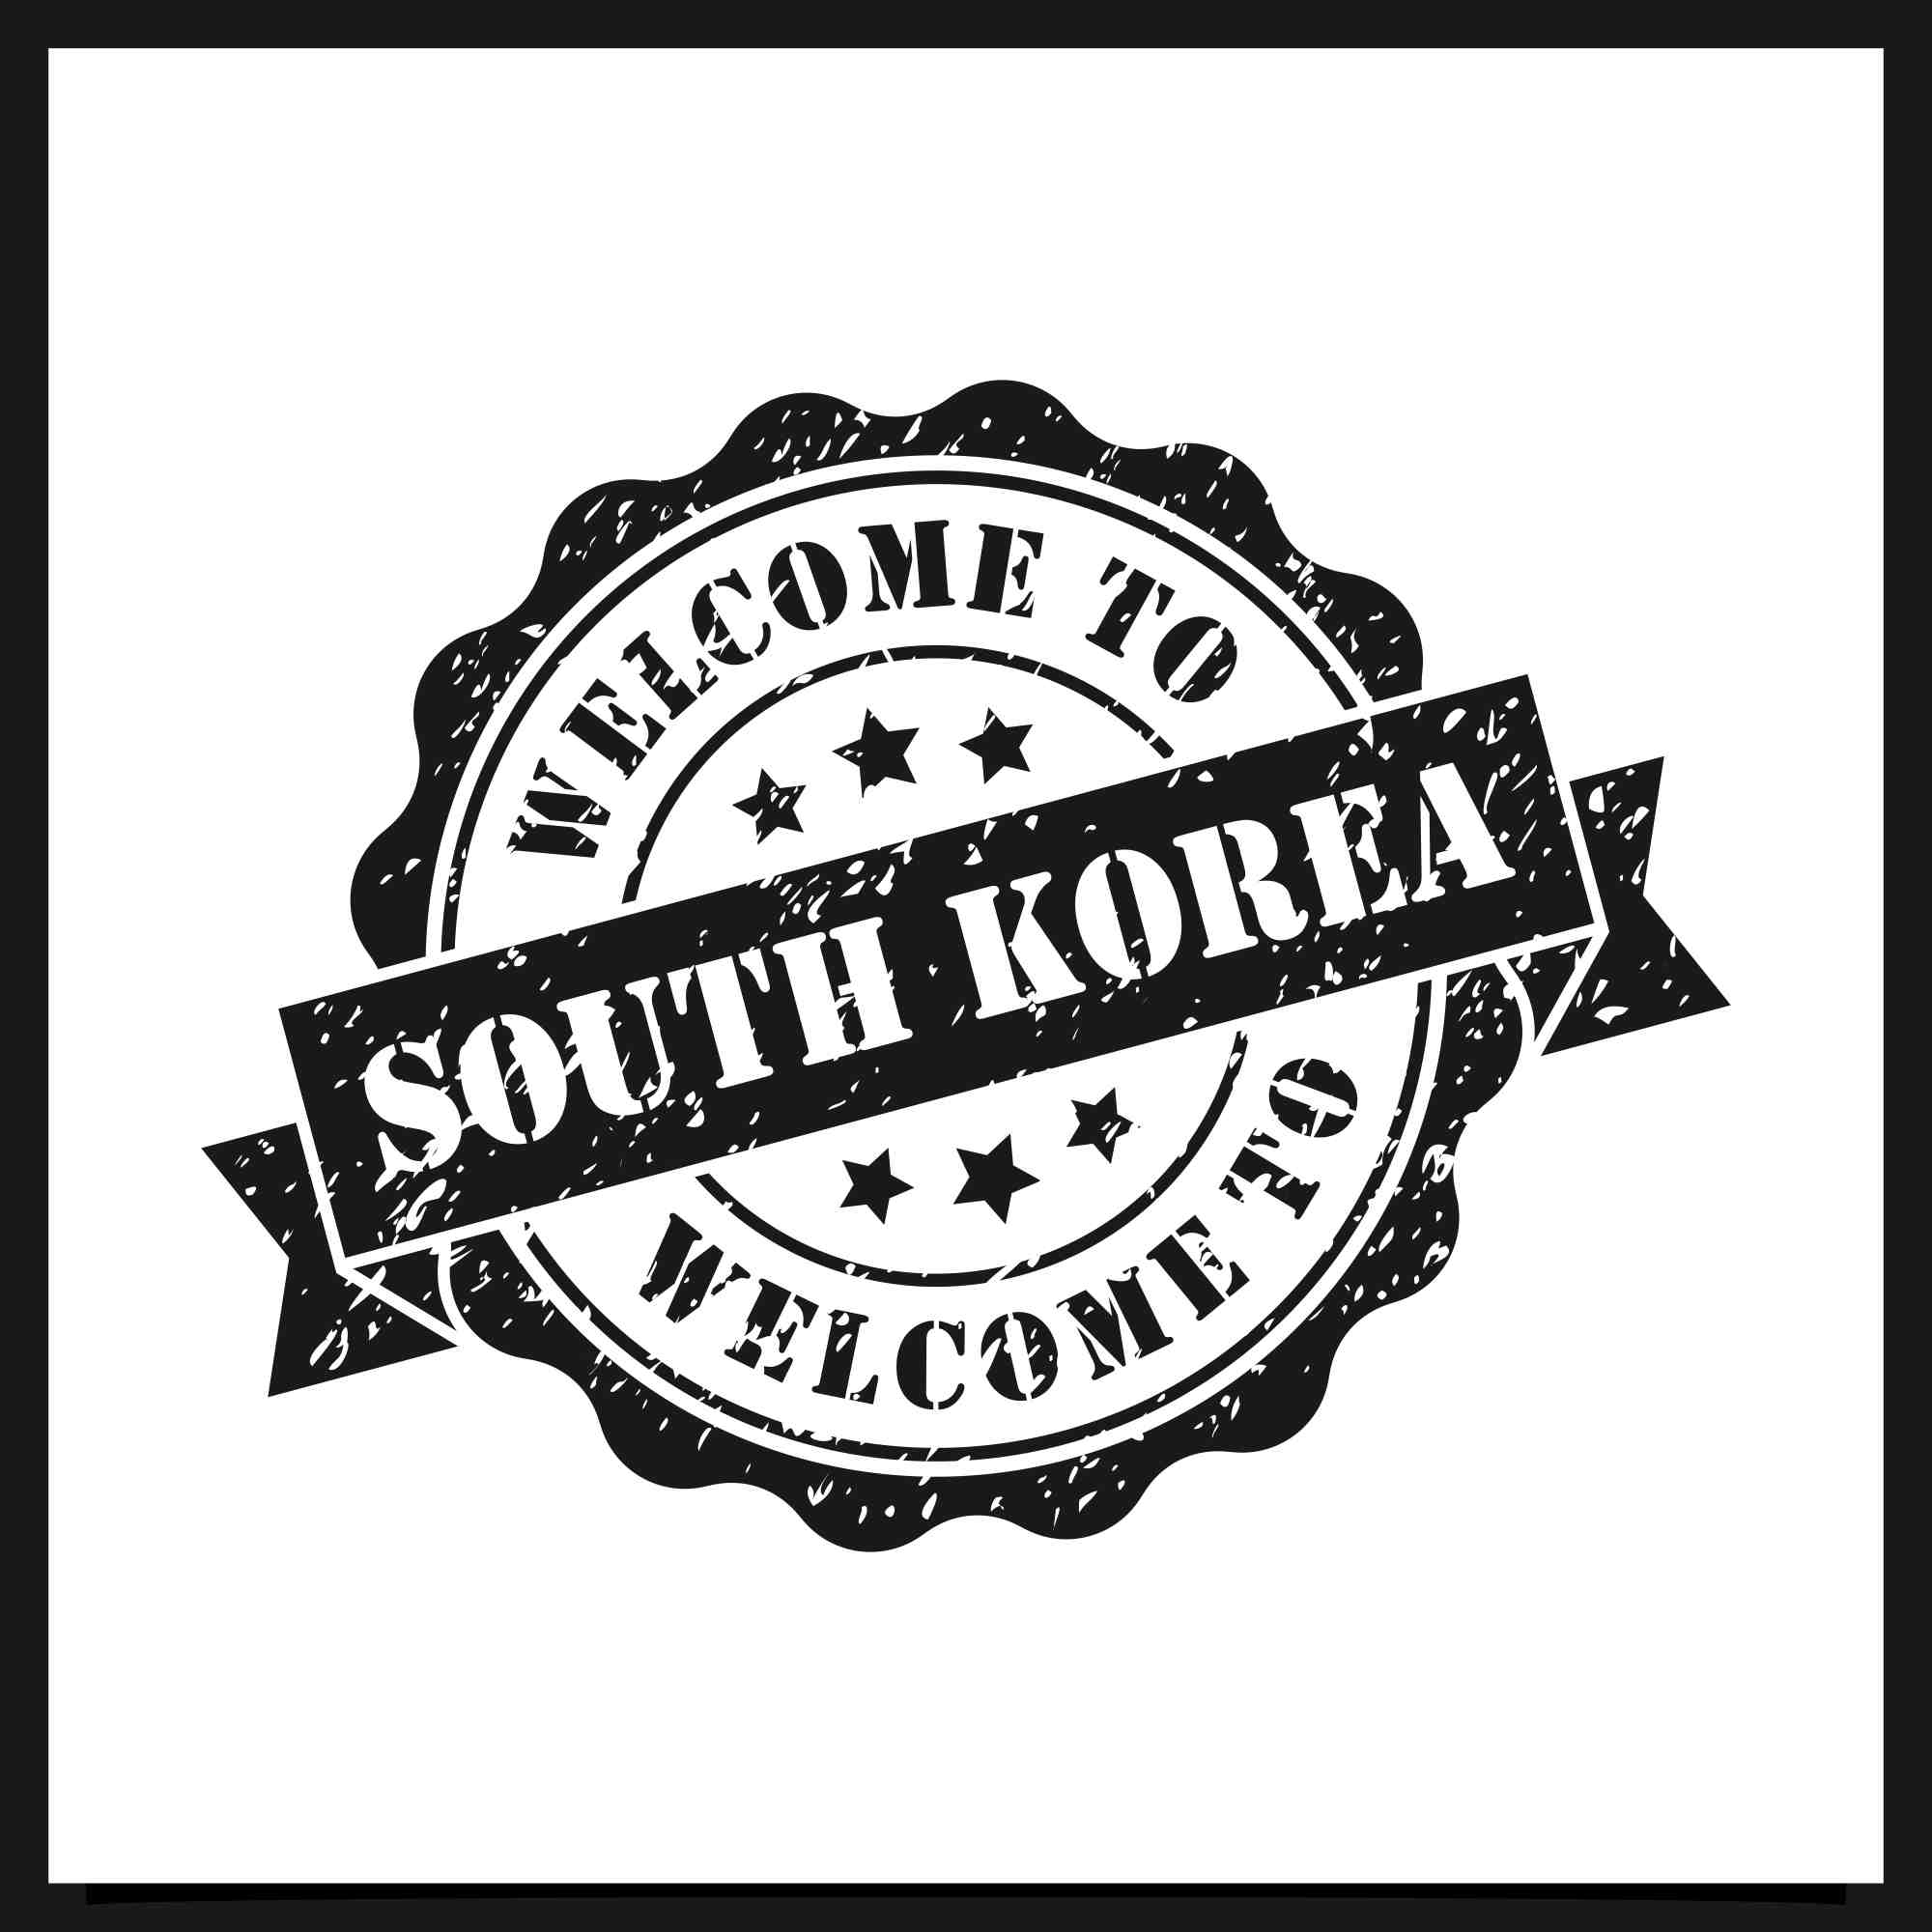 welcome to Seoul South Korea Stamps vector logo collection - $4 preview image.